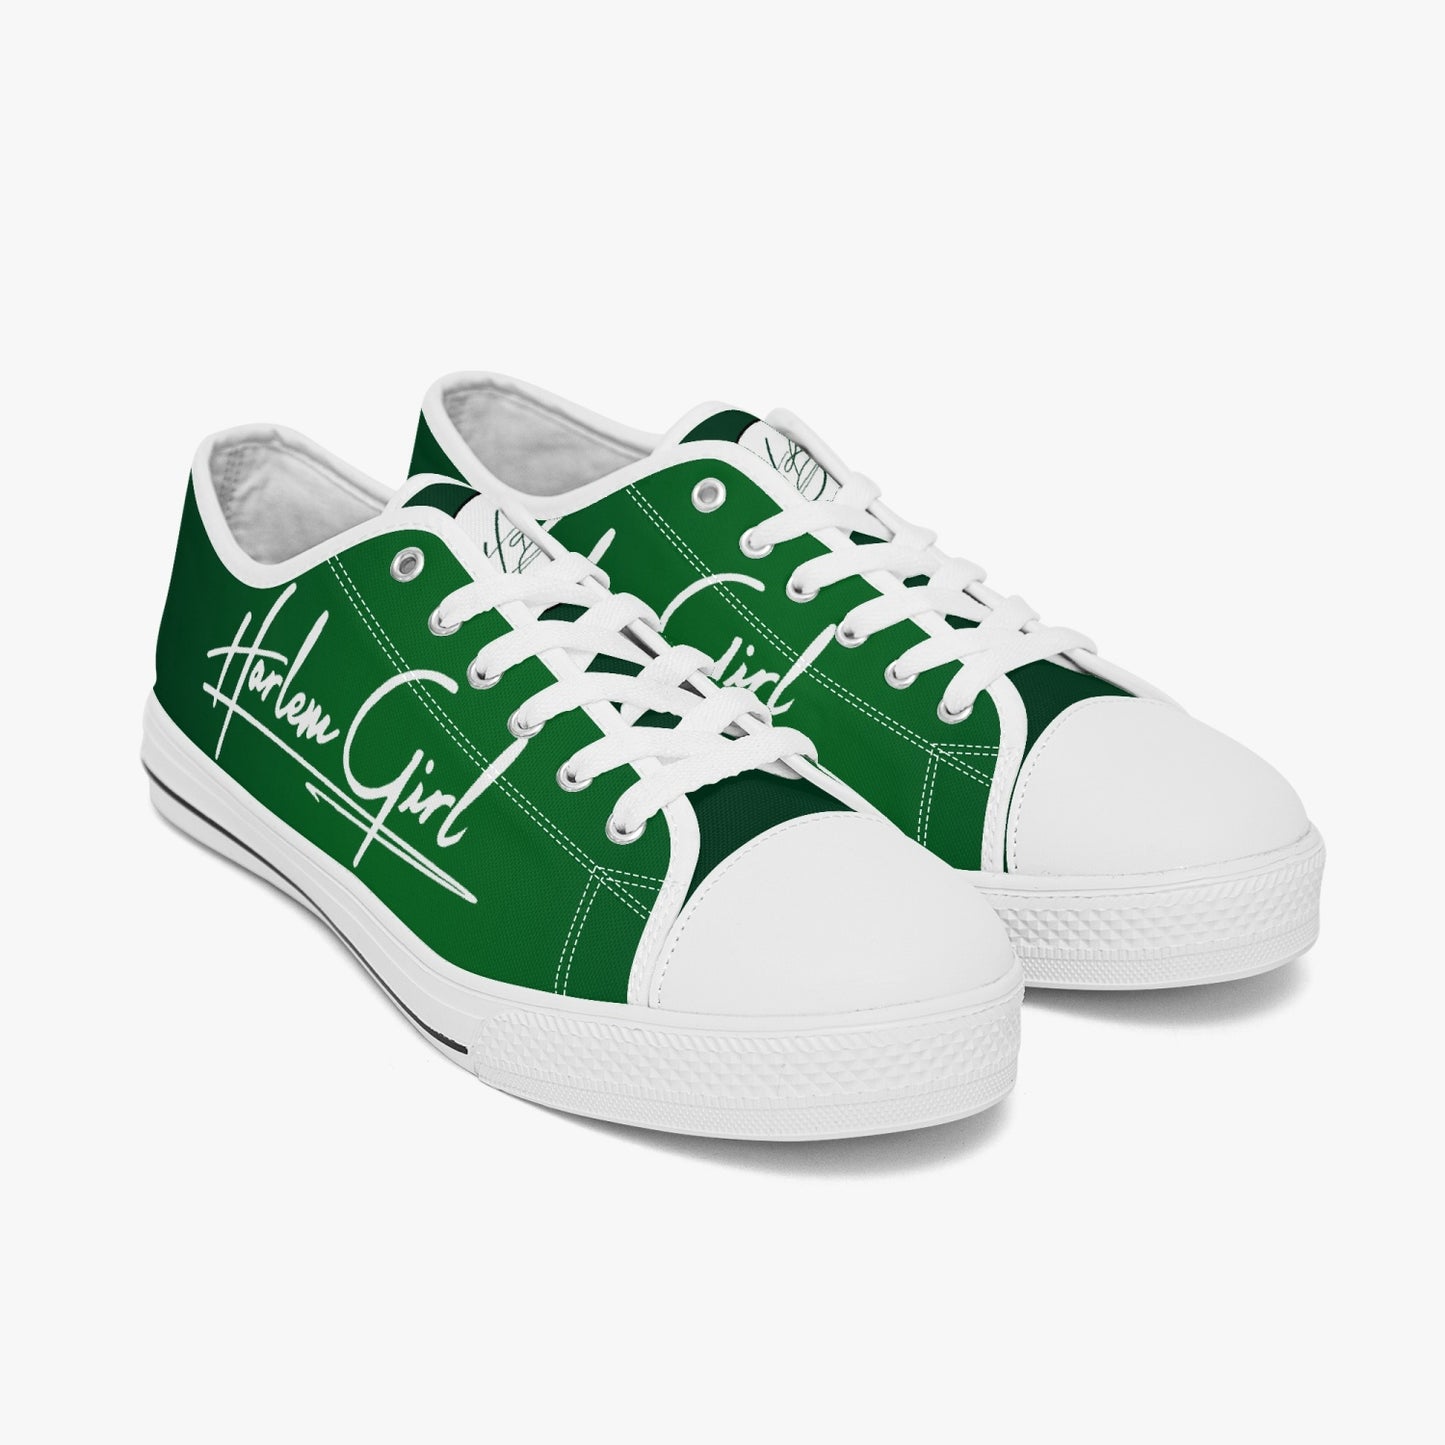 HB Harlem Girl "Lenox Ave" Classic Low Tops - Emerald - Women (Black or White Sole)